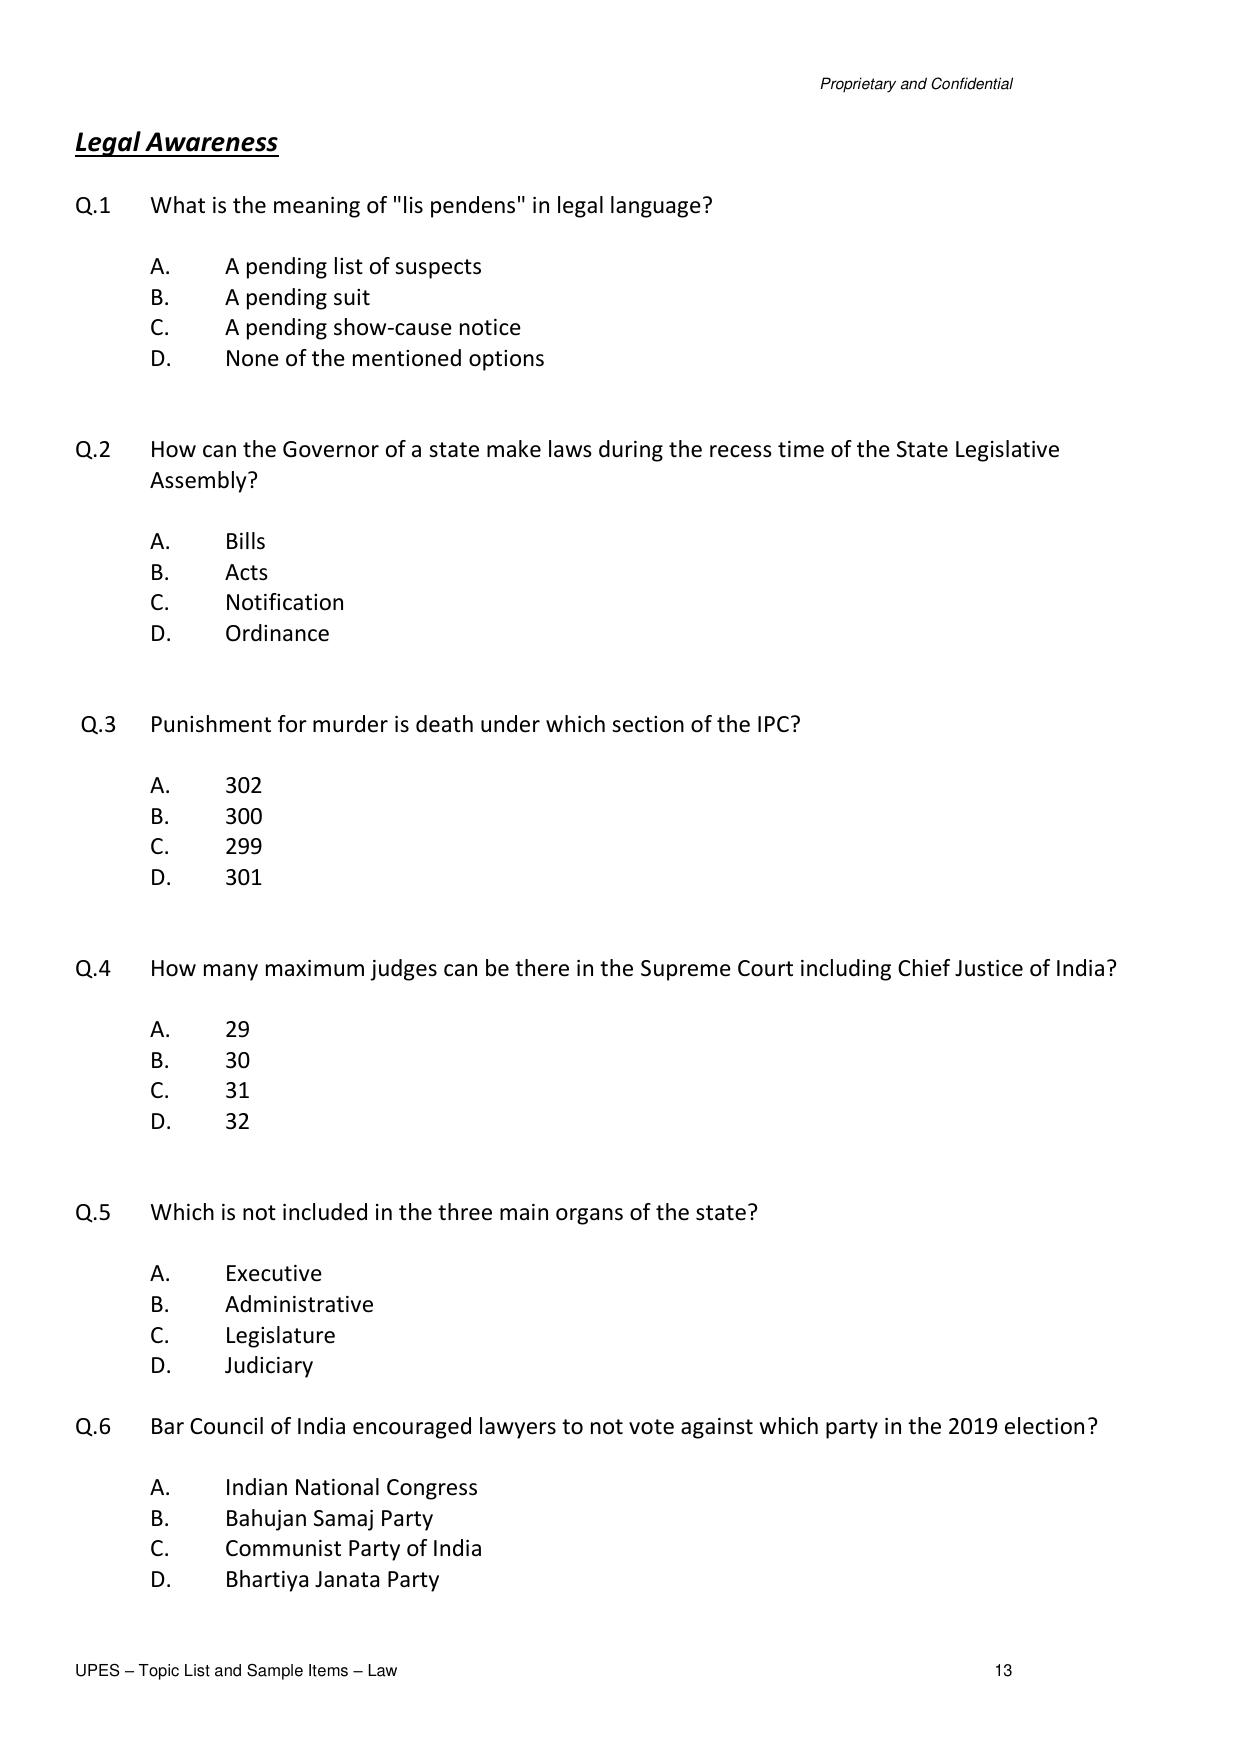 UPES Law Sample Papers - Page 13